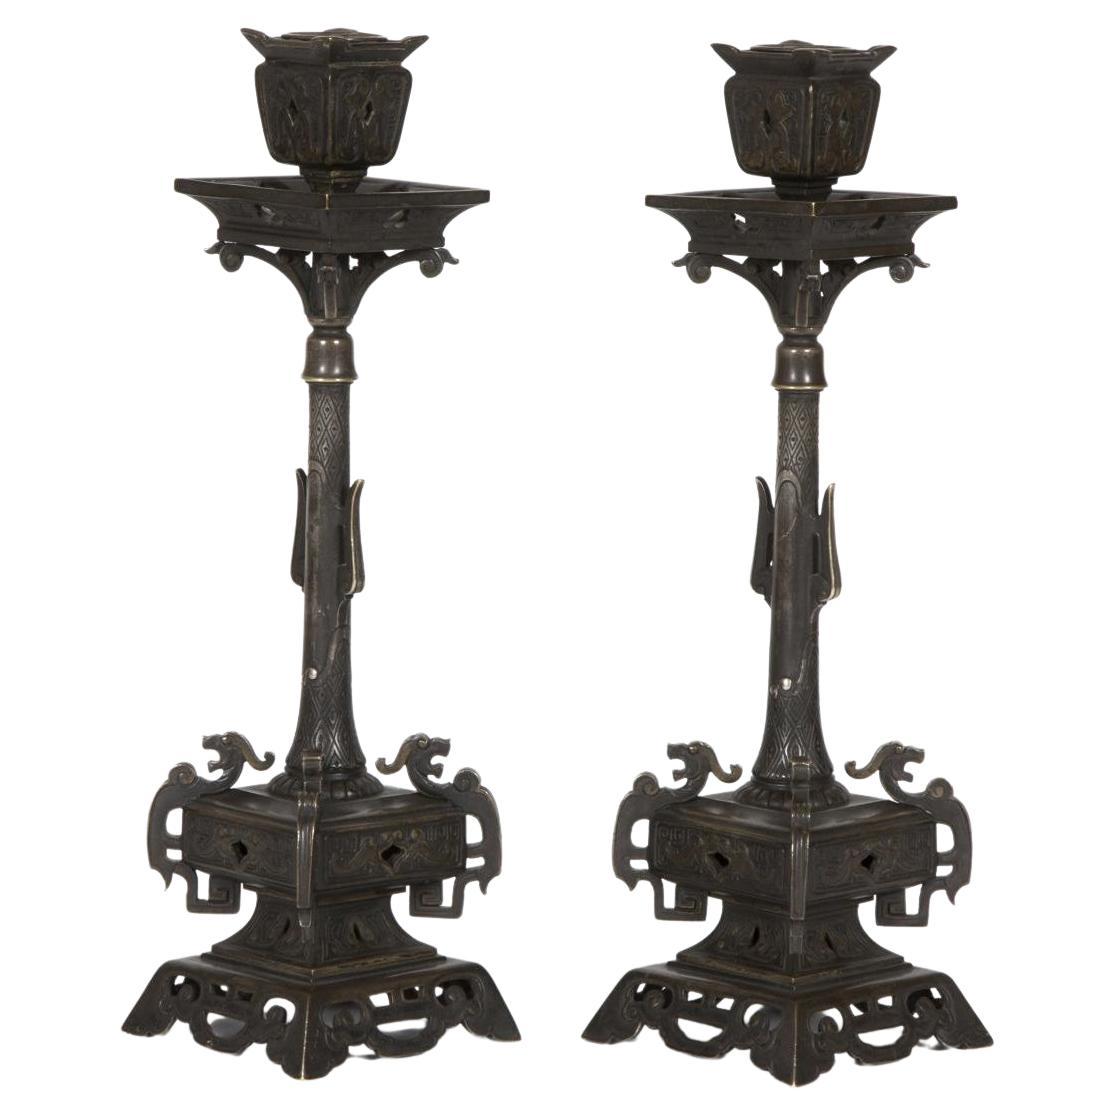 Pair of 19th Century Napoleon III Period Candlesticks. For Sale